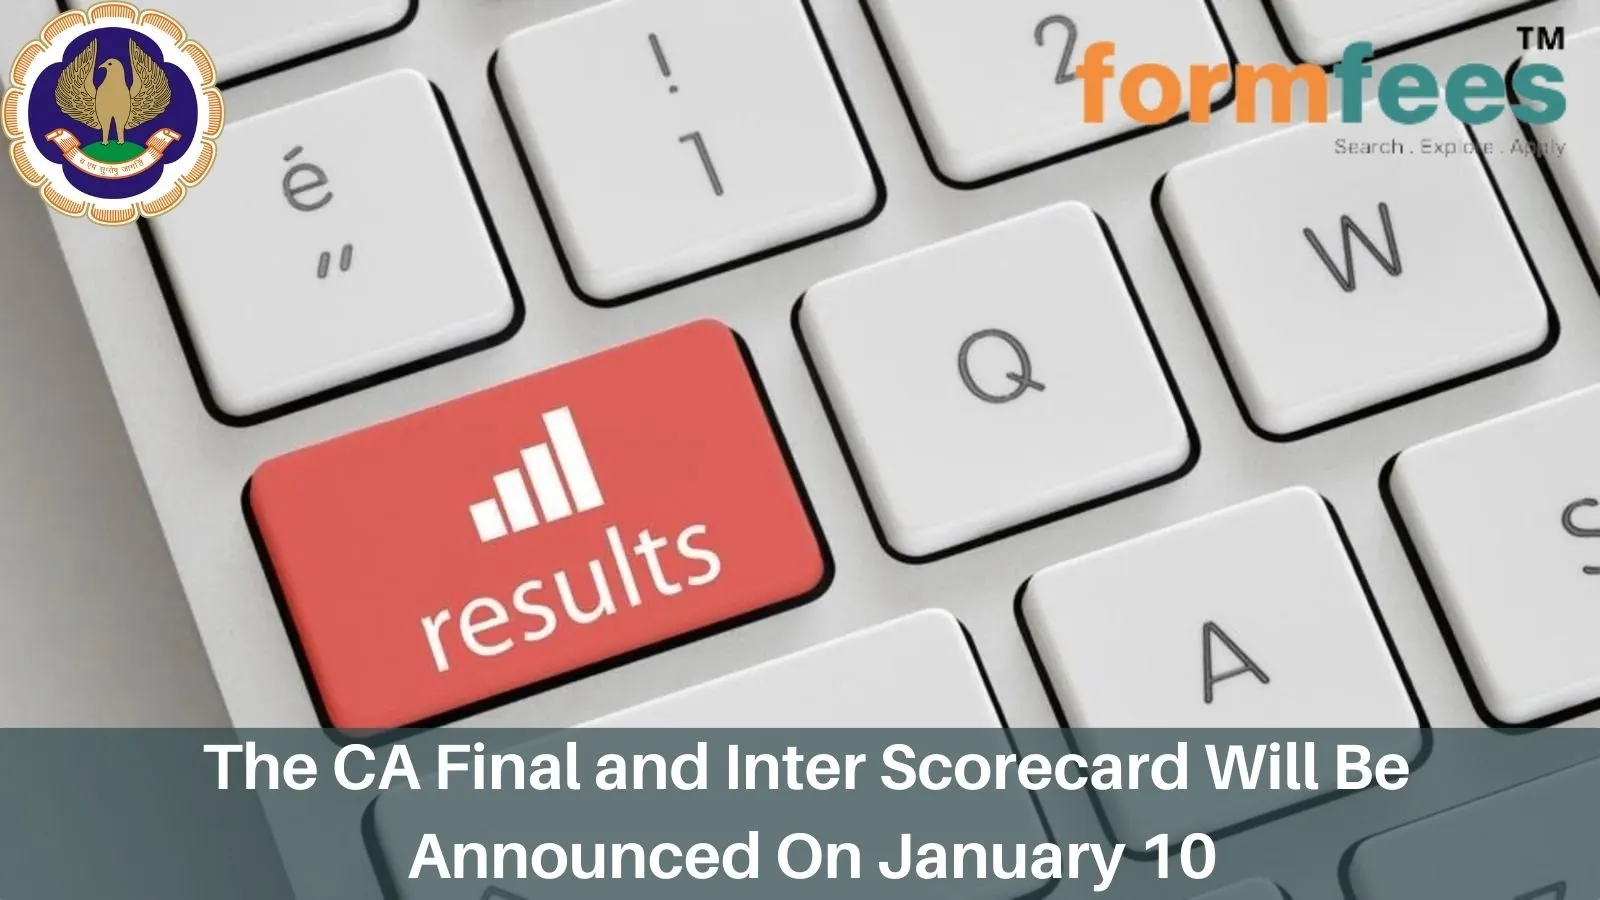 The CA Final and Inter Scorecard Will Be Announced On January 10